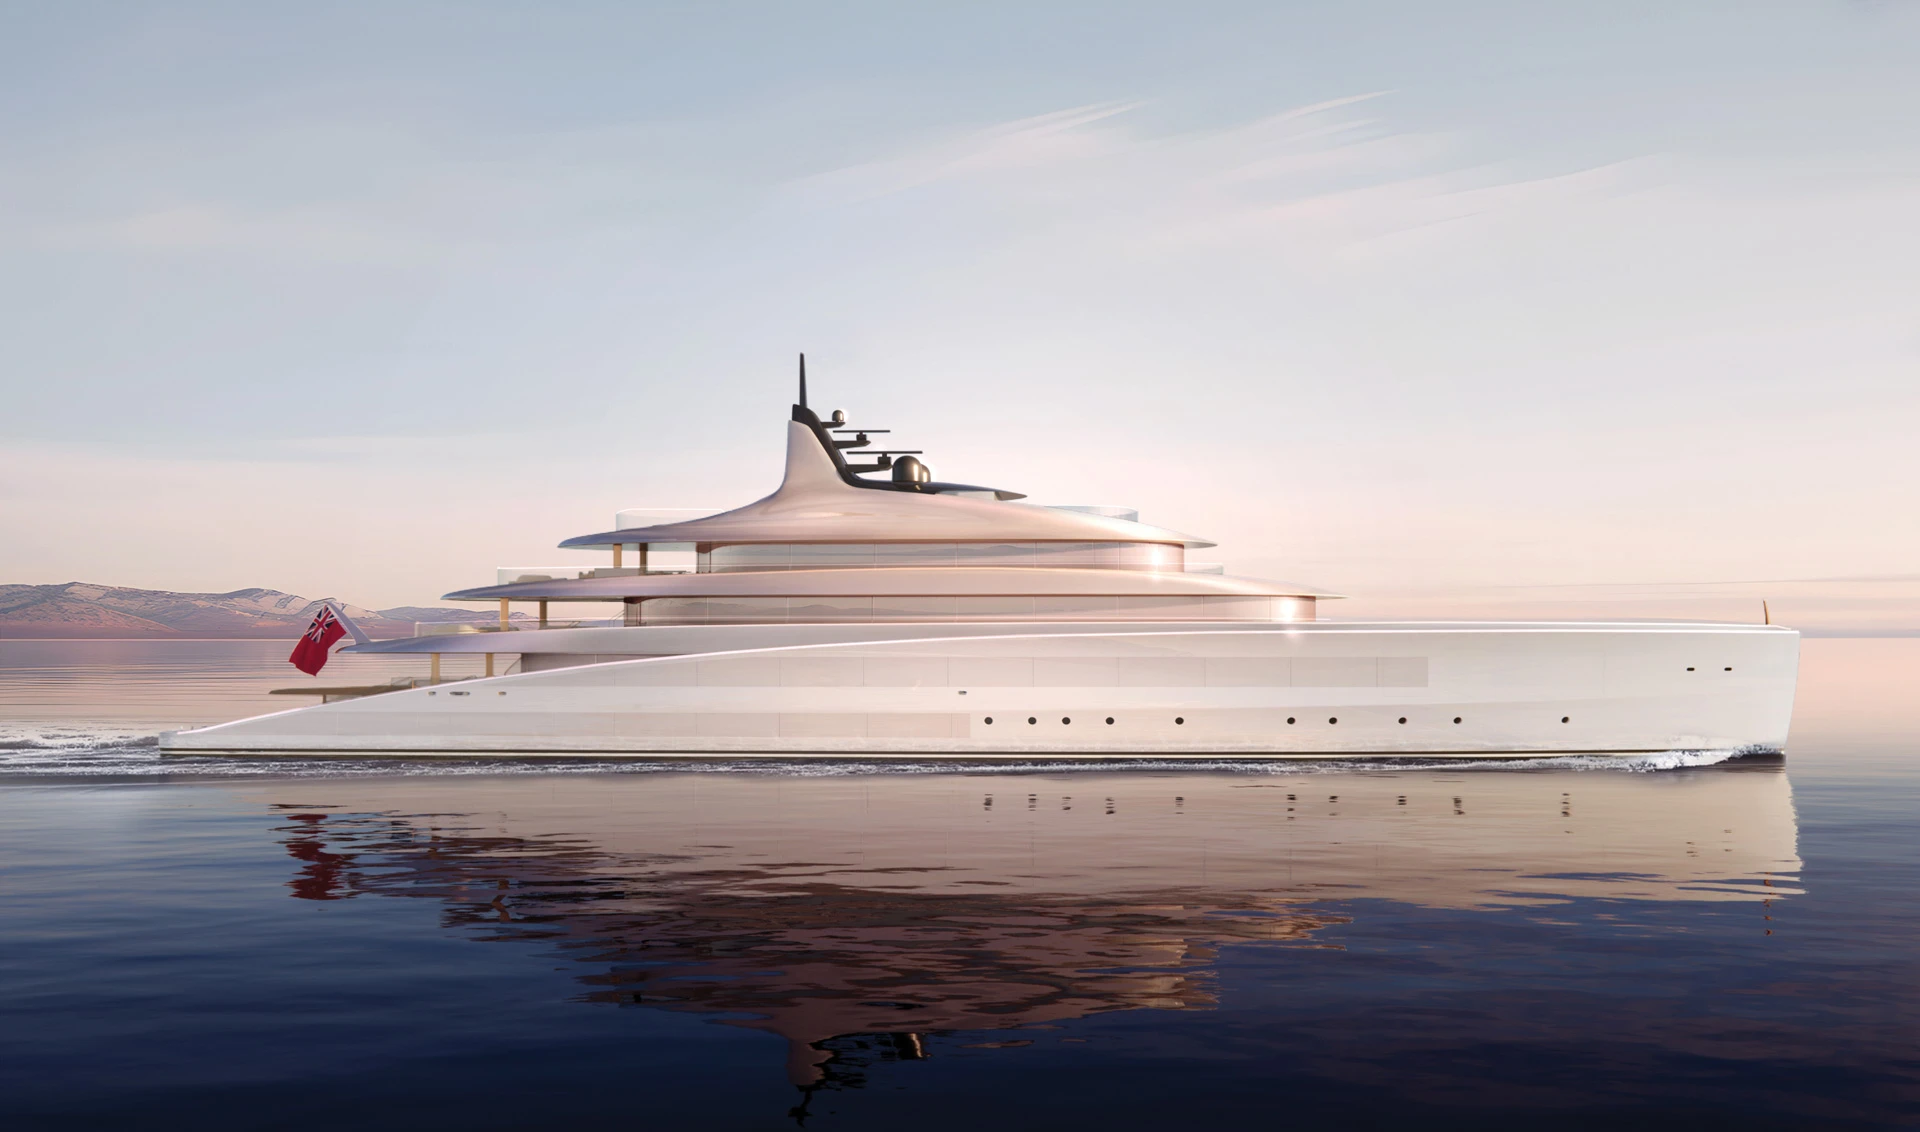 Project Reverie by Winch Design & Oceanco